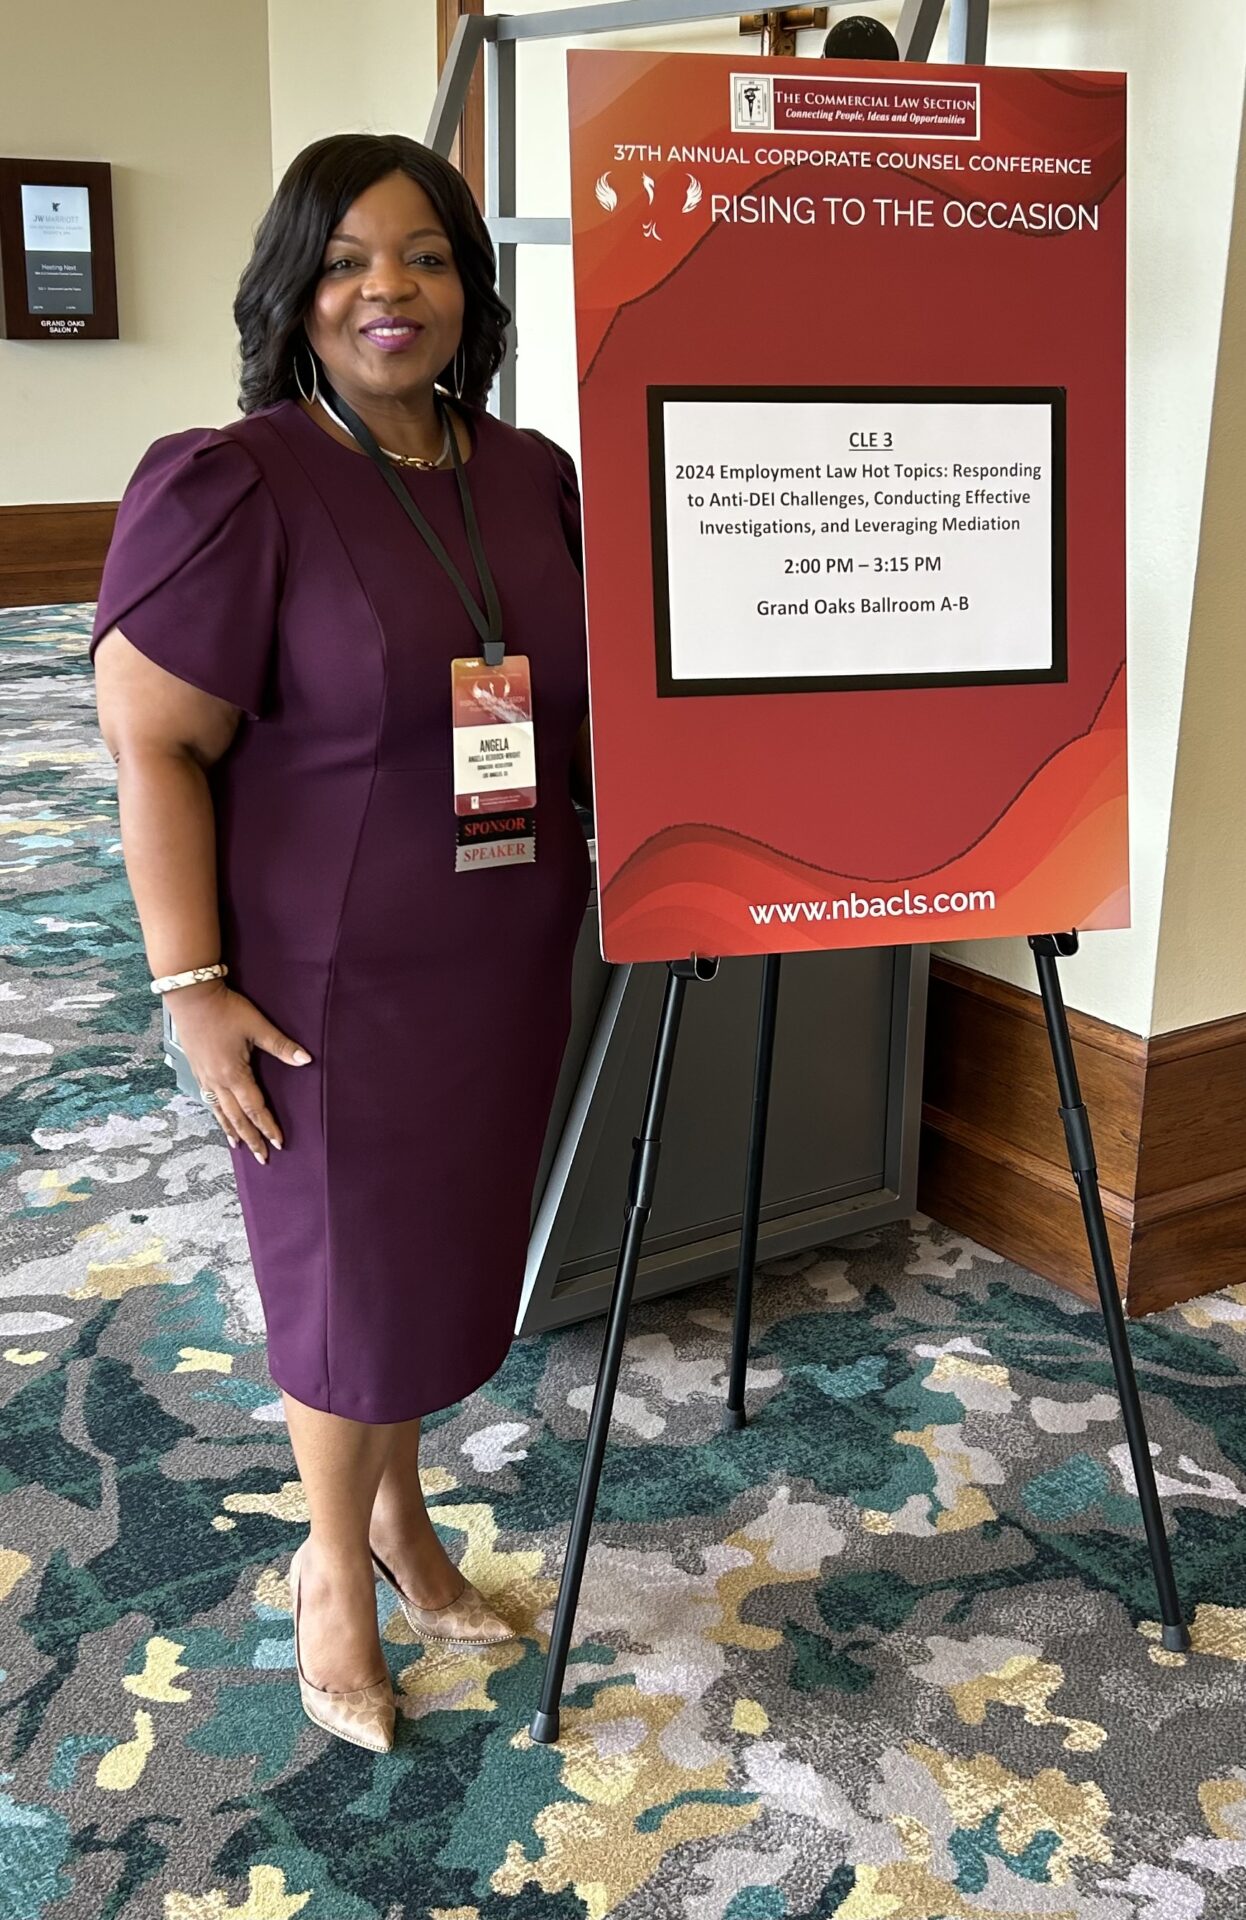 Angela Reddock-Wright smiling at the National Bar Association Commercial Law Section Corporate Counsel Conference in San Antonio, Texas where she discussed the developing laws around the use of Artificial Intelligence (AI) in the workplace, including the EEOC’s recent guidance to employers and employees on this topic. These issues are exemplified by the recent CVS discrimination lawsuit.